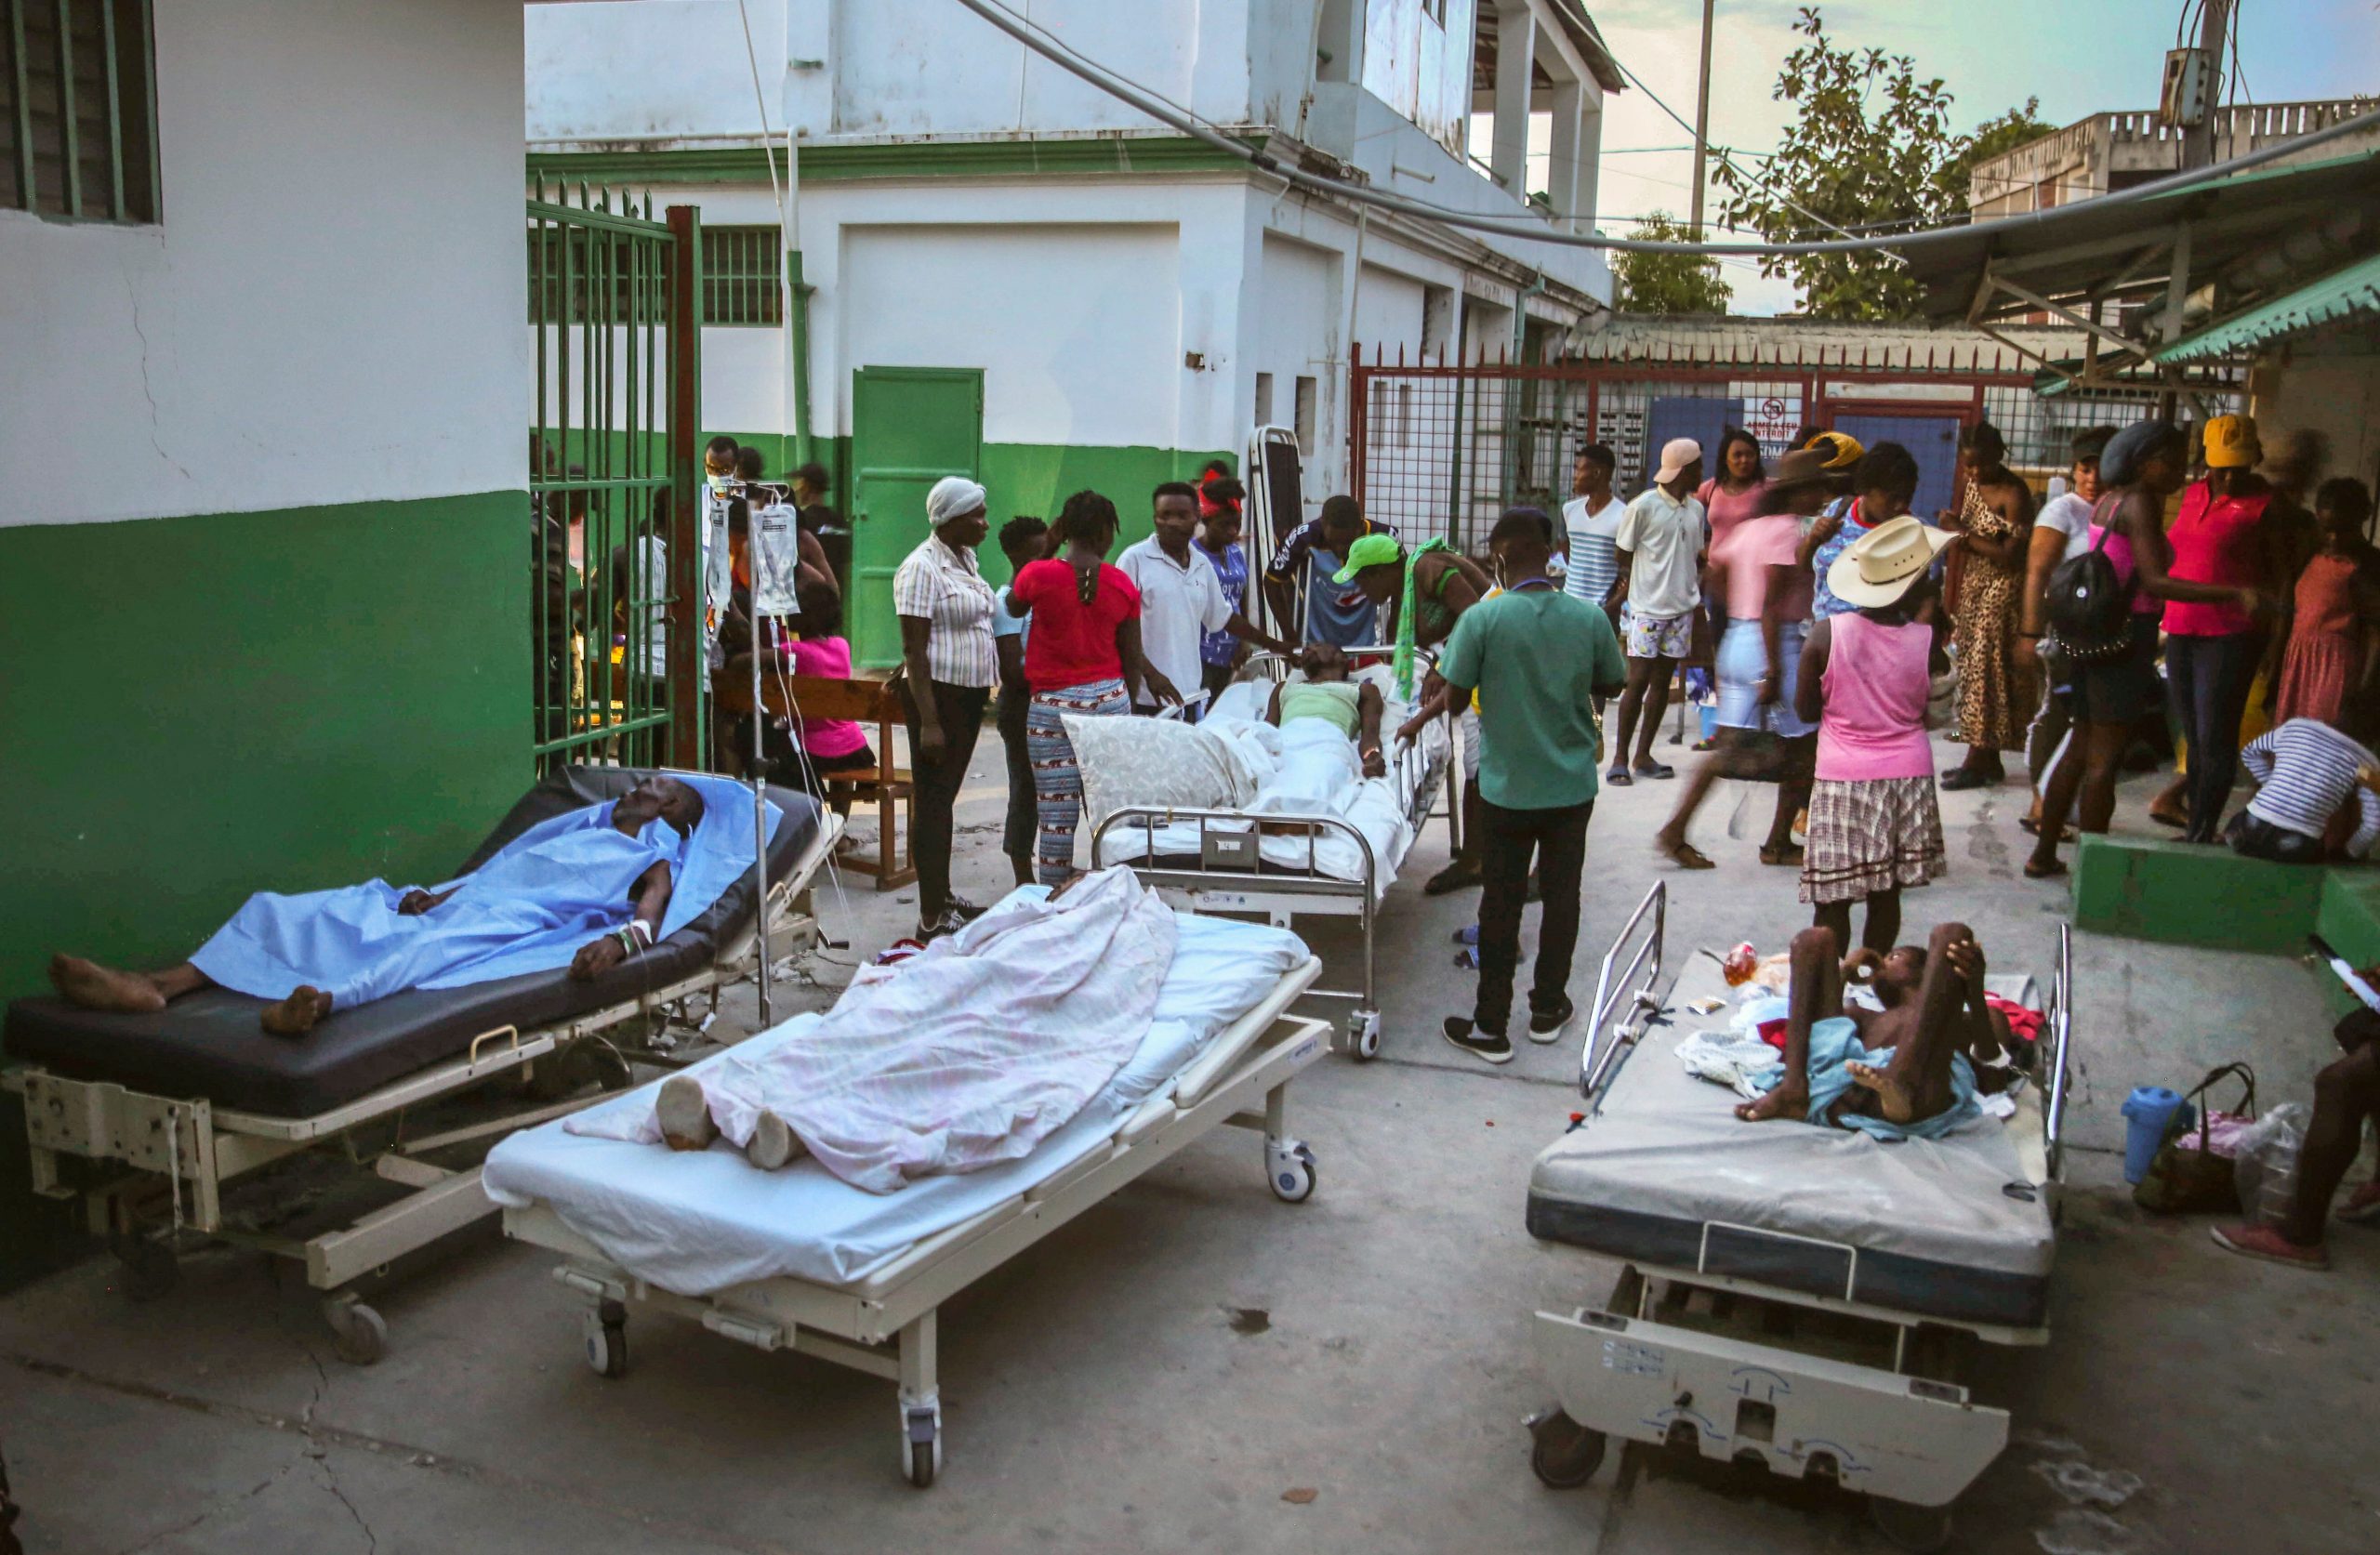 Those injured in Haiti earthquake at high risk of infection, amputation: Experts